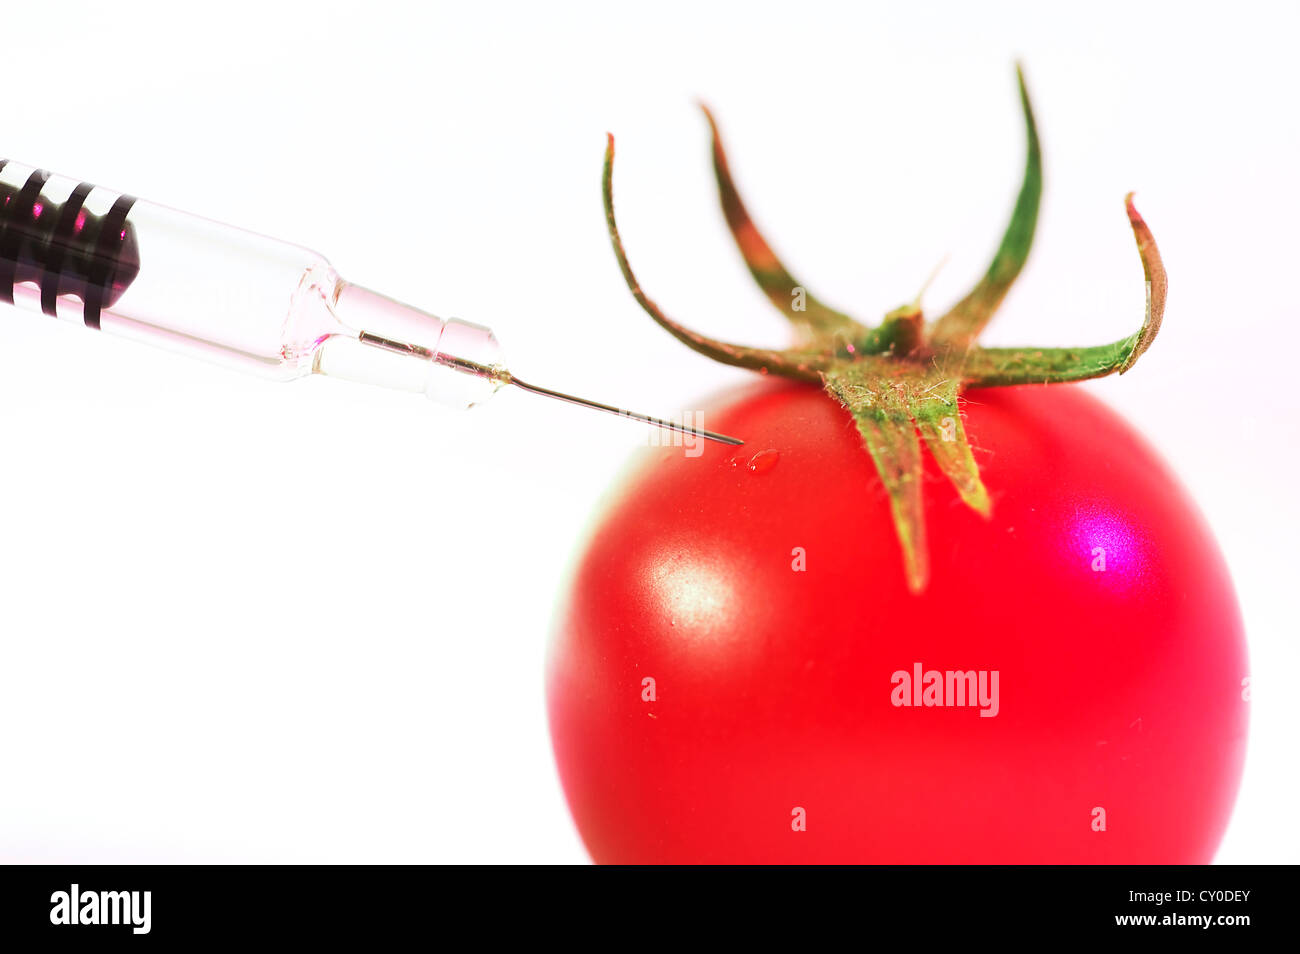 close up of a needle injecting a GM tomato Stock Photo